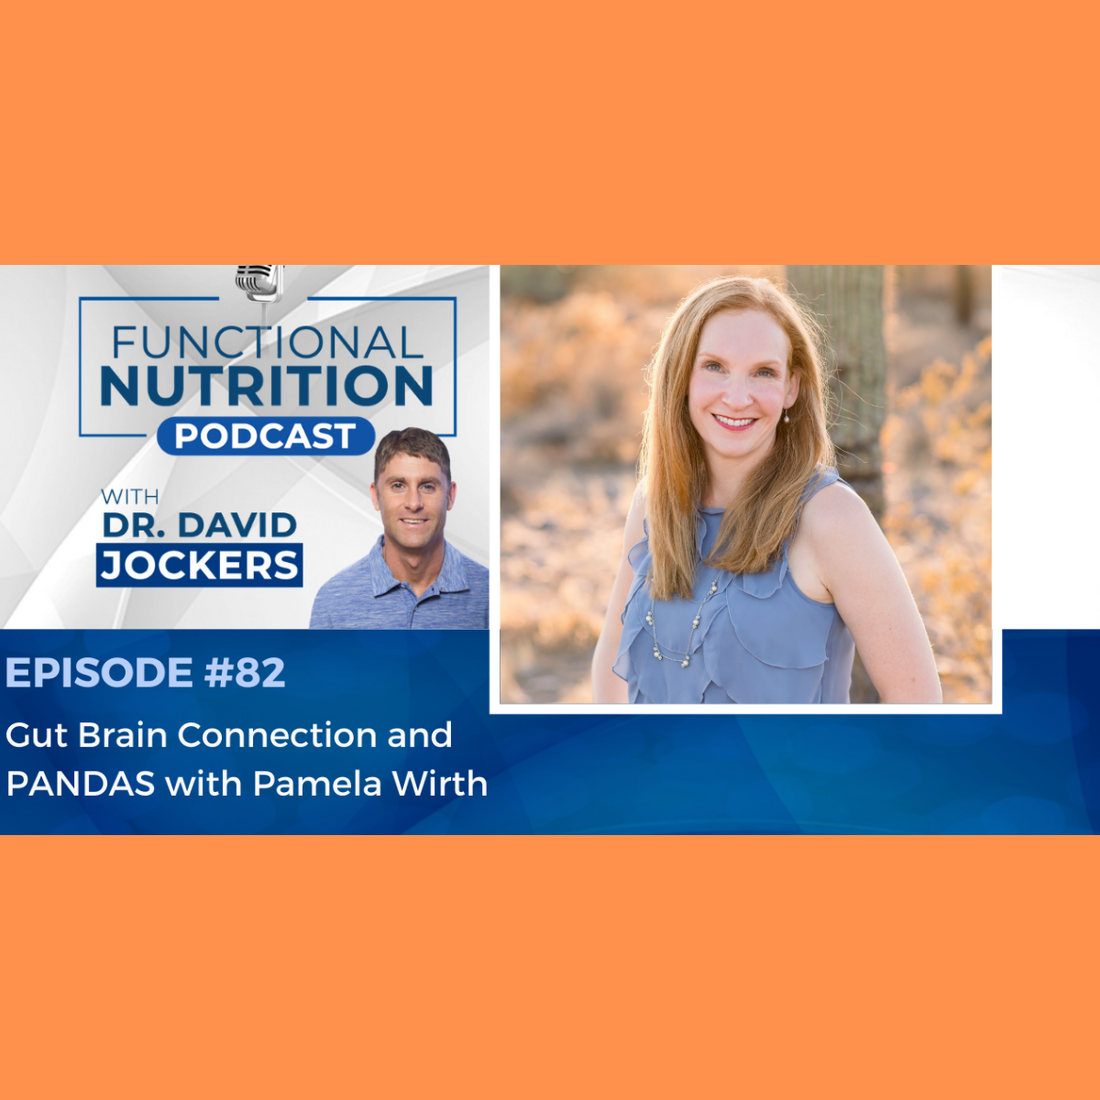 Dr. Jockers - Your Functional Nutrition Podcast Interview With Hello Health® Founder Pamela Wirth